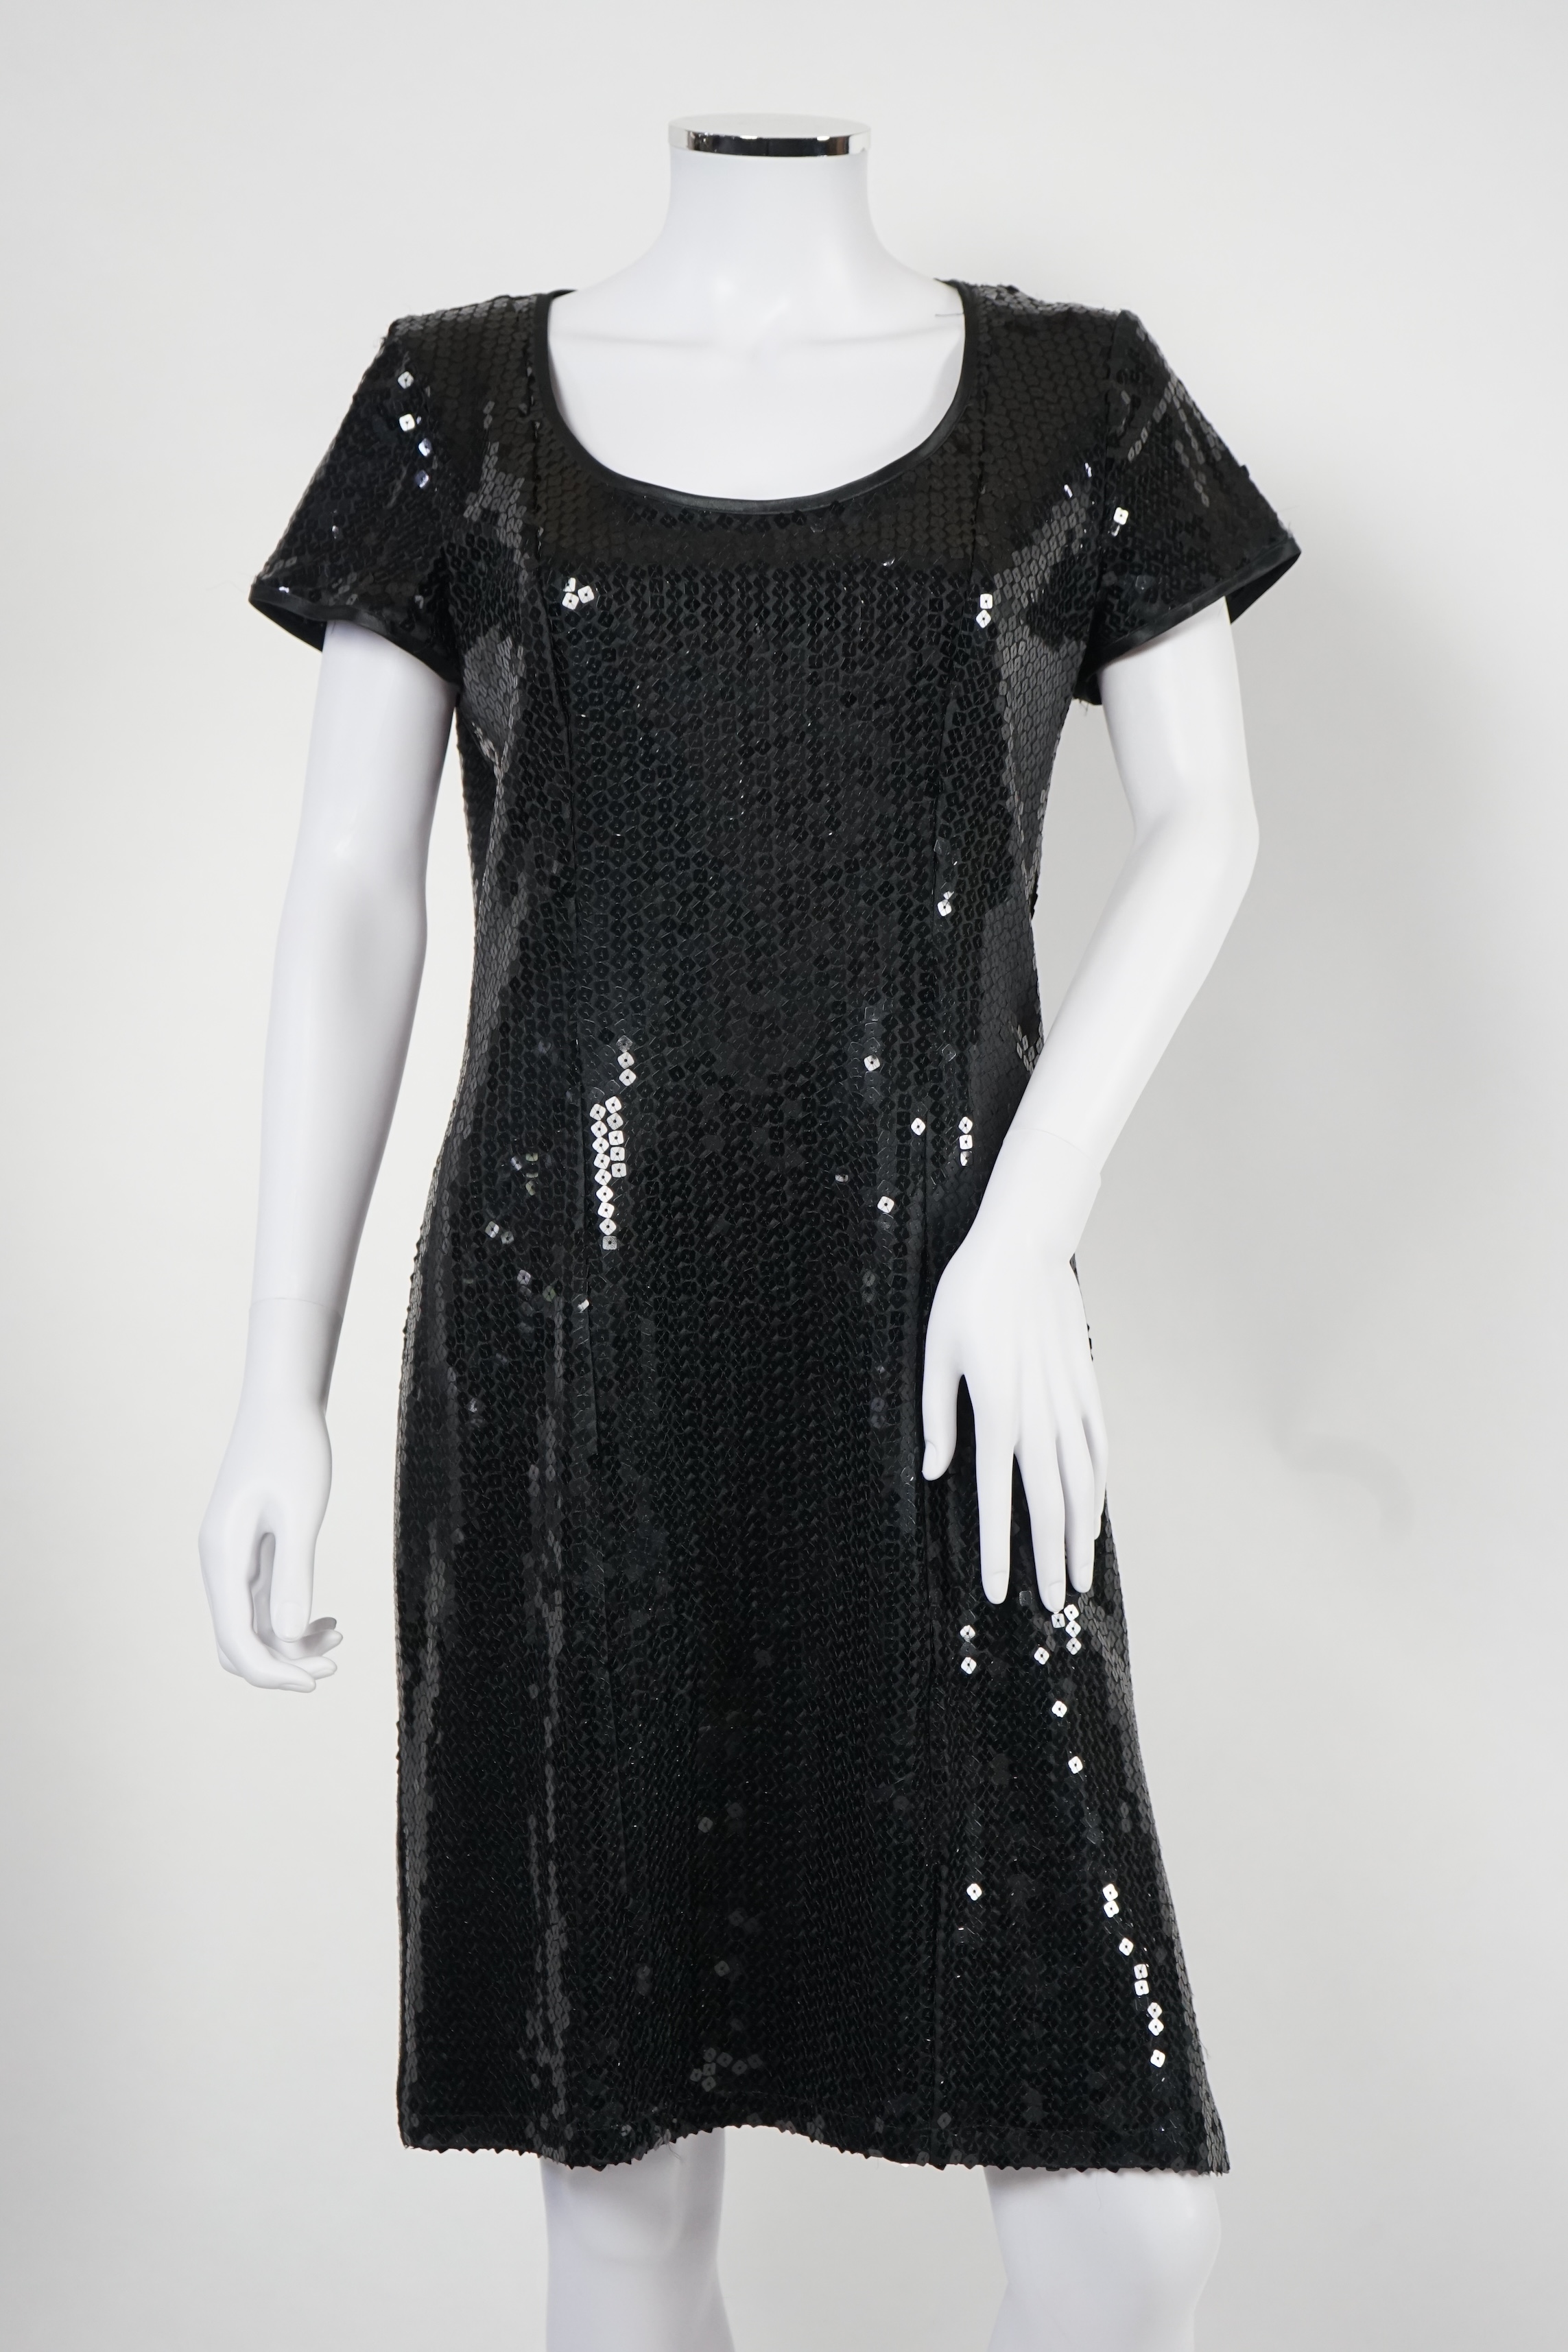 Two vintage Yves Saint Laurent variation lady's black evening dresses, F 42 (UK 14). Proceeds to Happy Paws Puppy Rescue